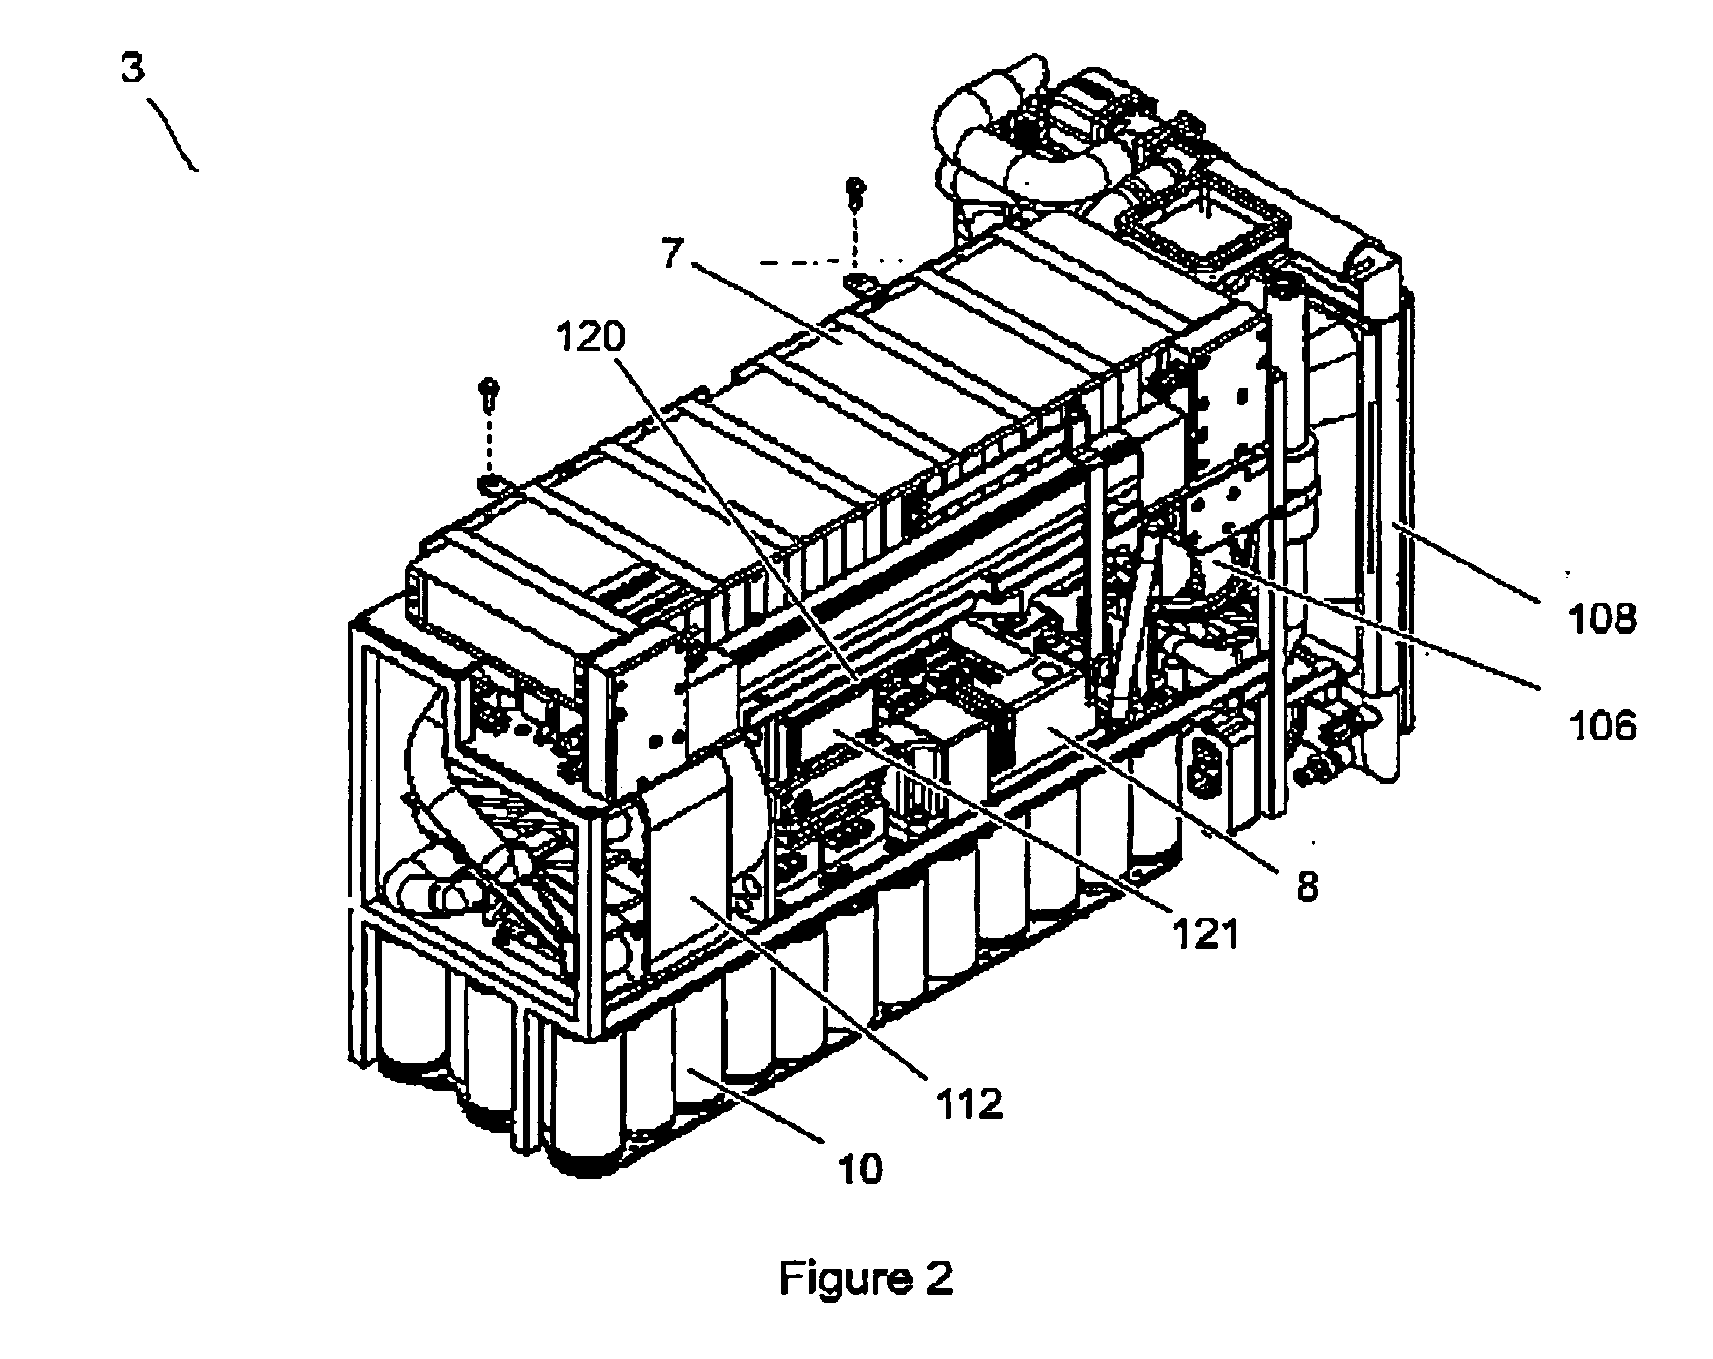 Capacitor bank for electrical generator